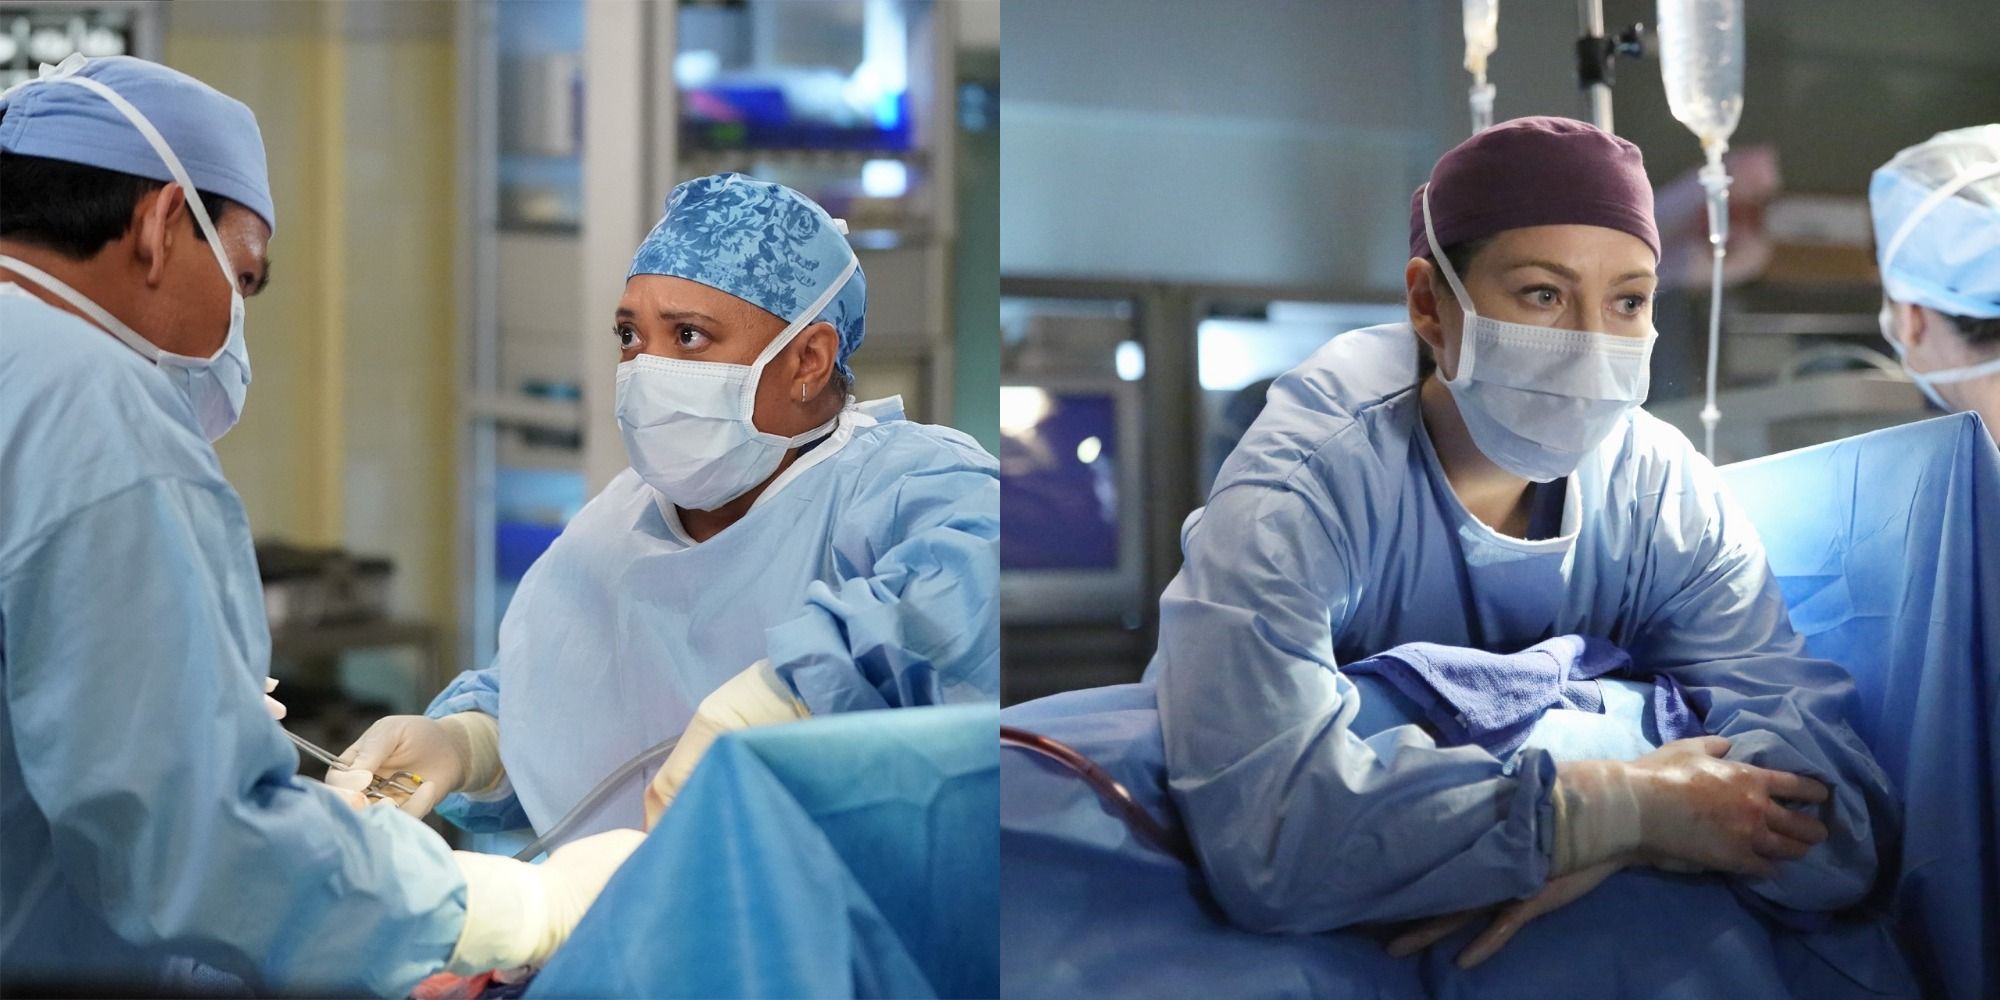 Split image - Bailey performing surgery looking worried / Meredith hunched over her patient during surgery